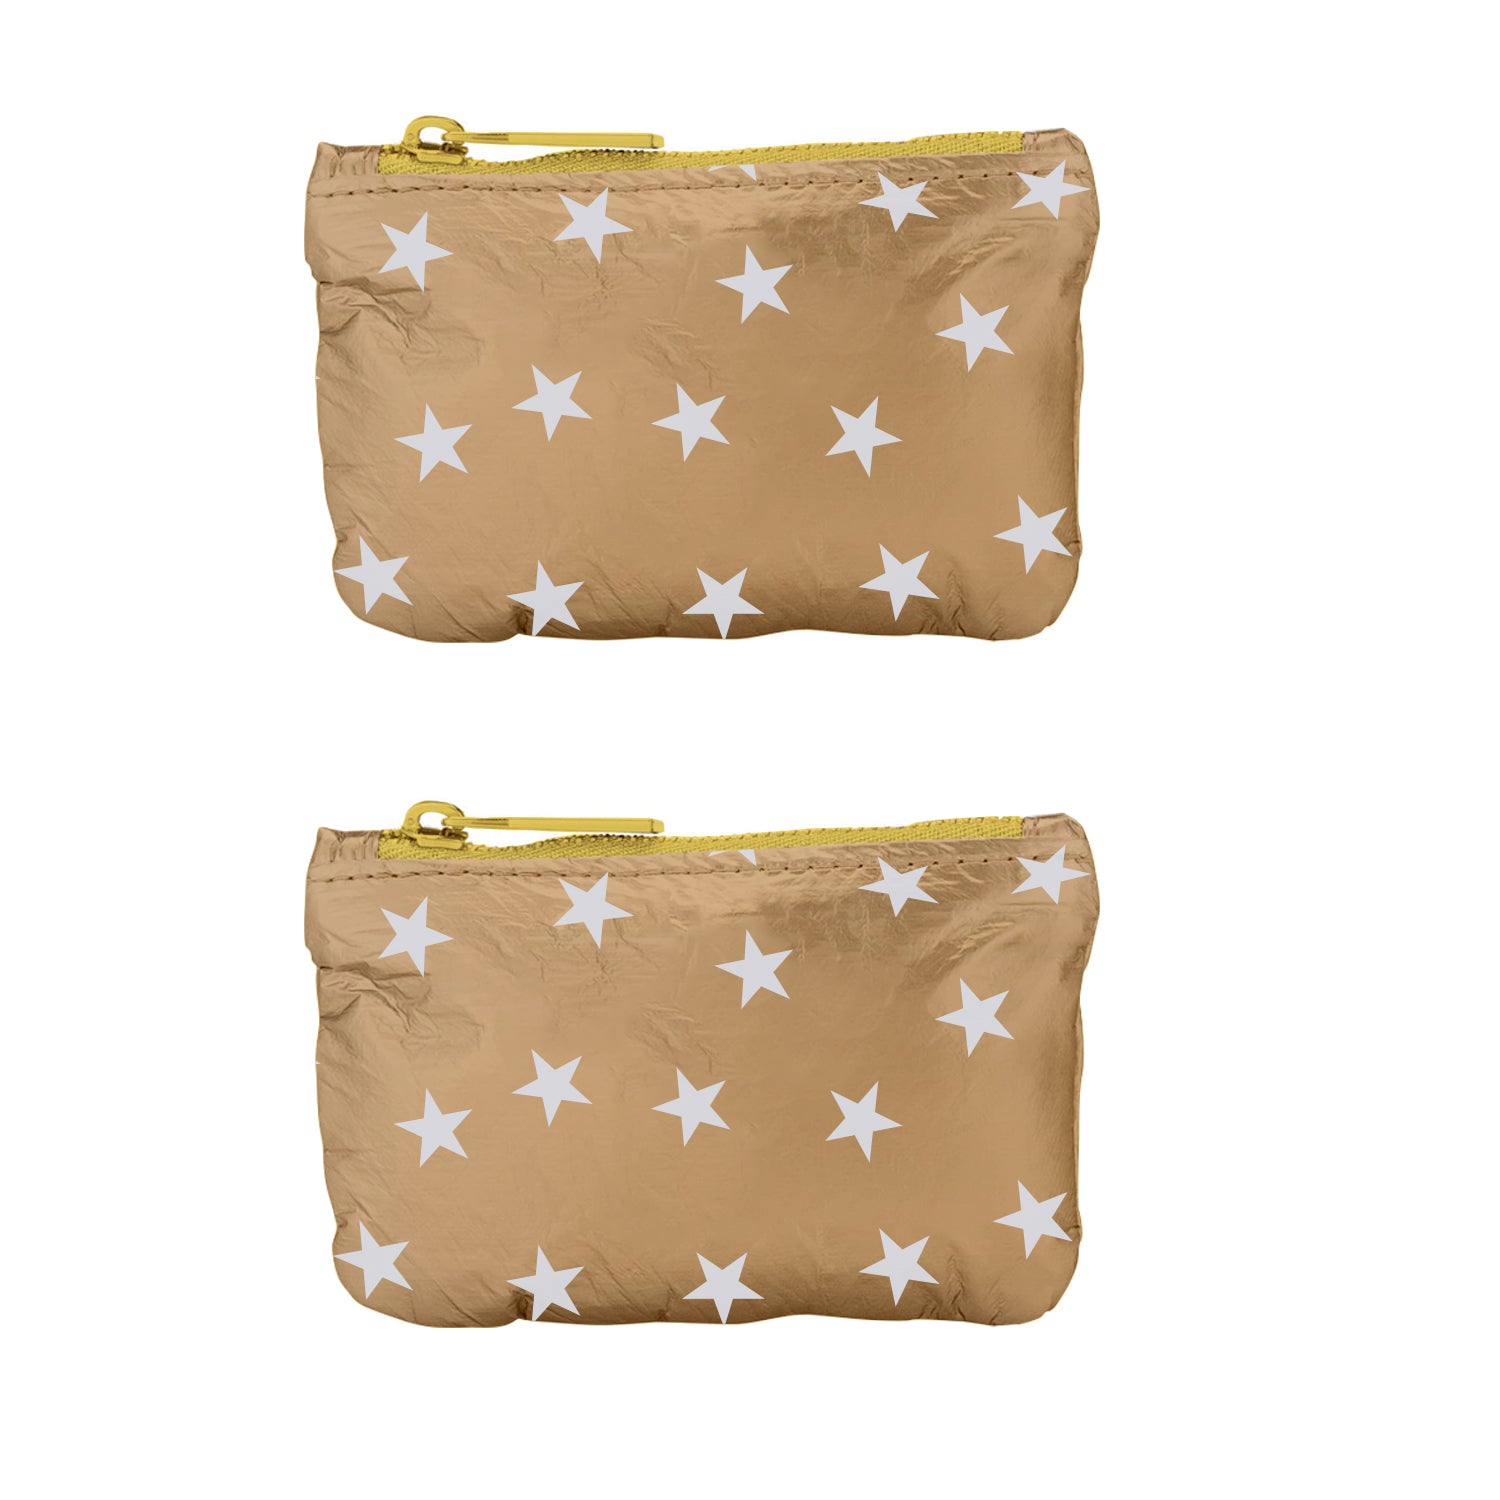 Set of two gift card holder packs in gold with myriad white stars